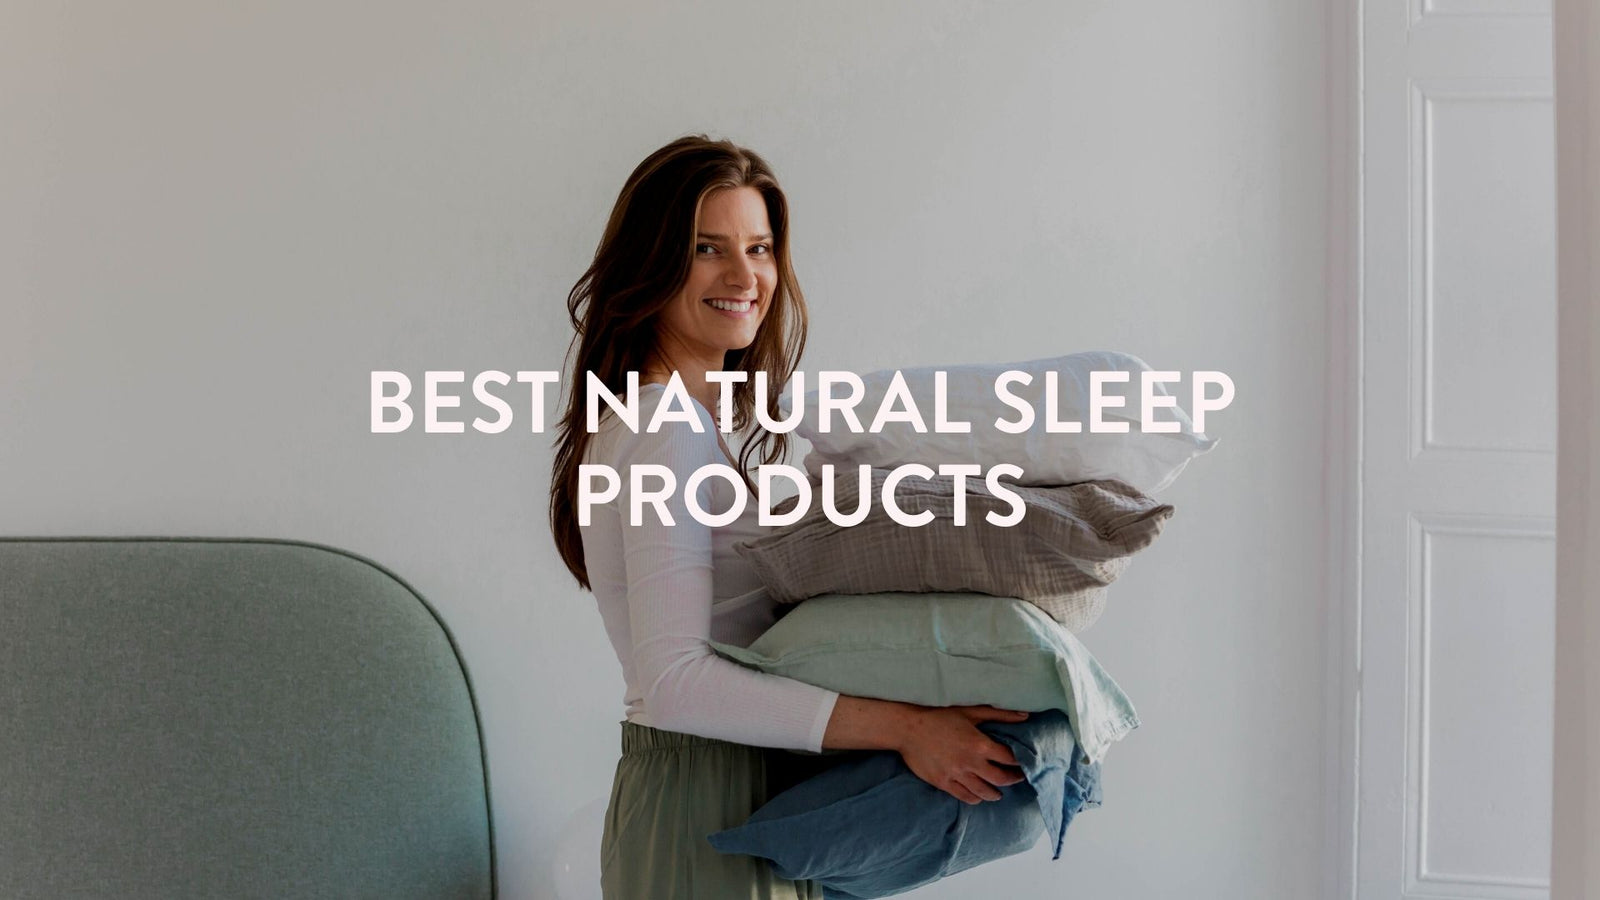 Best natural sleep products - UK